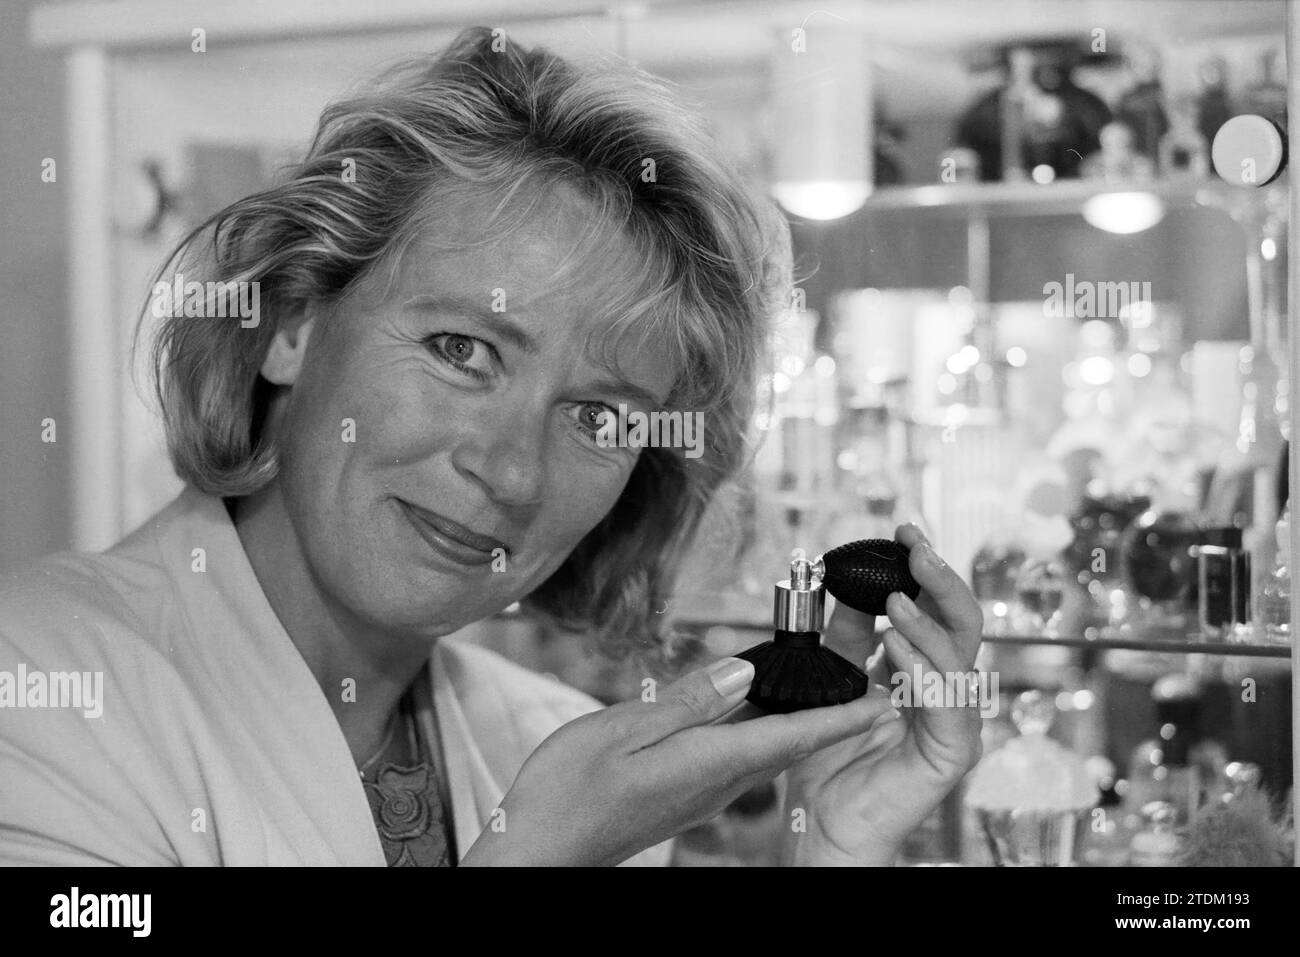 Maaike v.d. Linden, perfume collection, 29-06-1994, Whizgle News from the Past, Tailored for the Future. Explore historical narratives, Dutch The Netherlands agency image with a modern perspective, bridging the gap between yesterday's events and tomorrow's insights. A timeless journey shaping the stories that shape our future Stock Photo